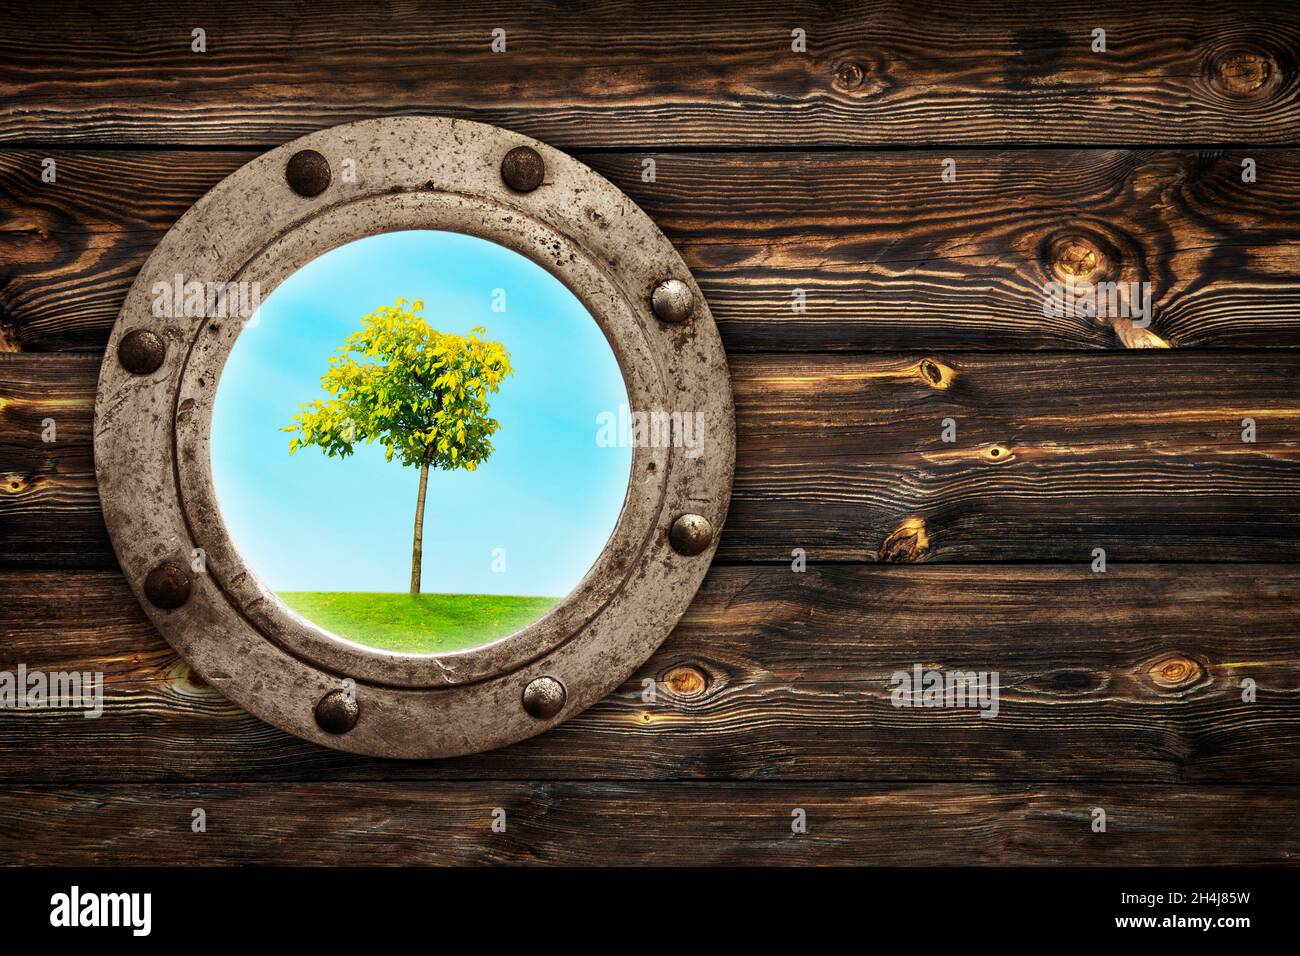 Close-up of an old rusty closed porthole window with  lonely tree standing on meadow view. Old rich wood grain texture background with knots. Stock Photo